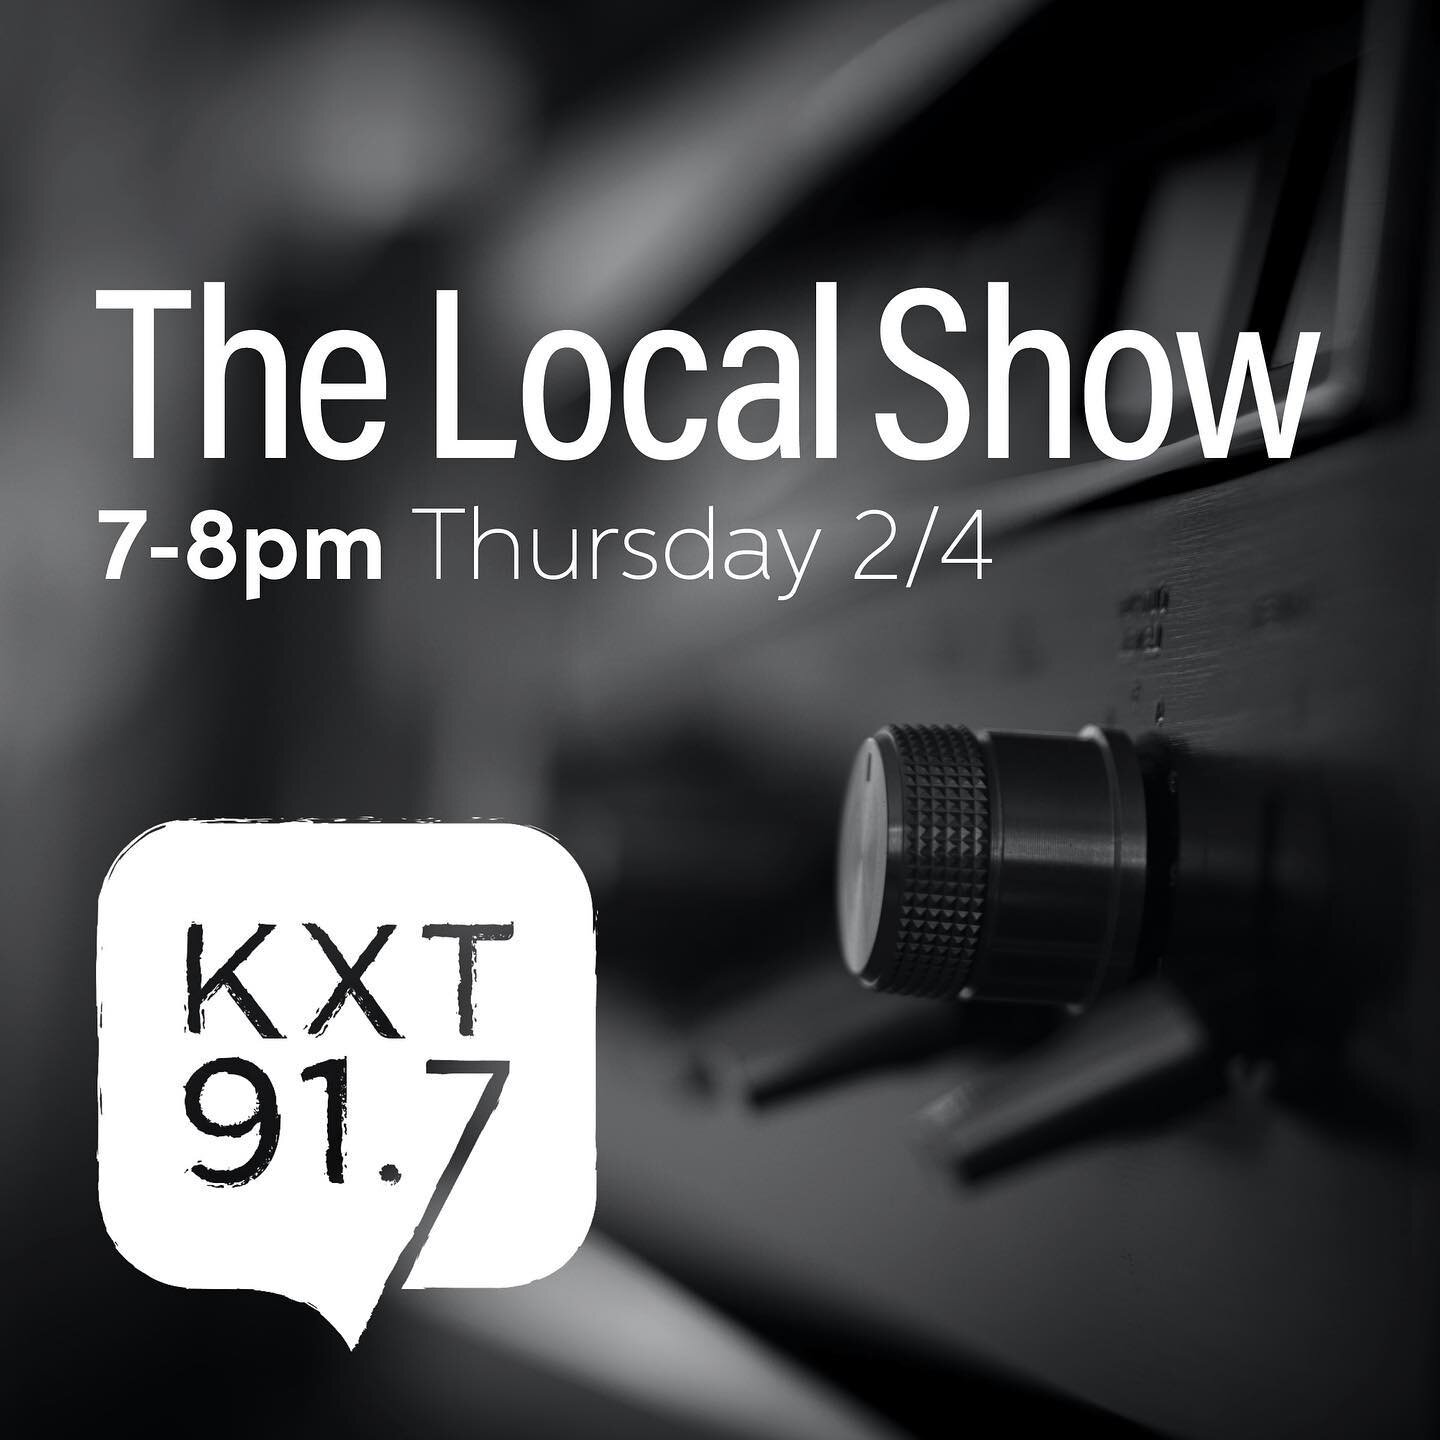 Tomorrow. To say we are excited would be an understatement. If you&rsquo;re not local, tune in online to hear us during the local show! @kxtradio